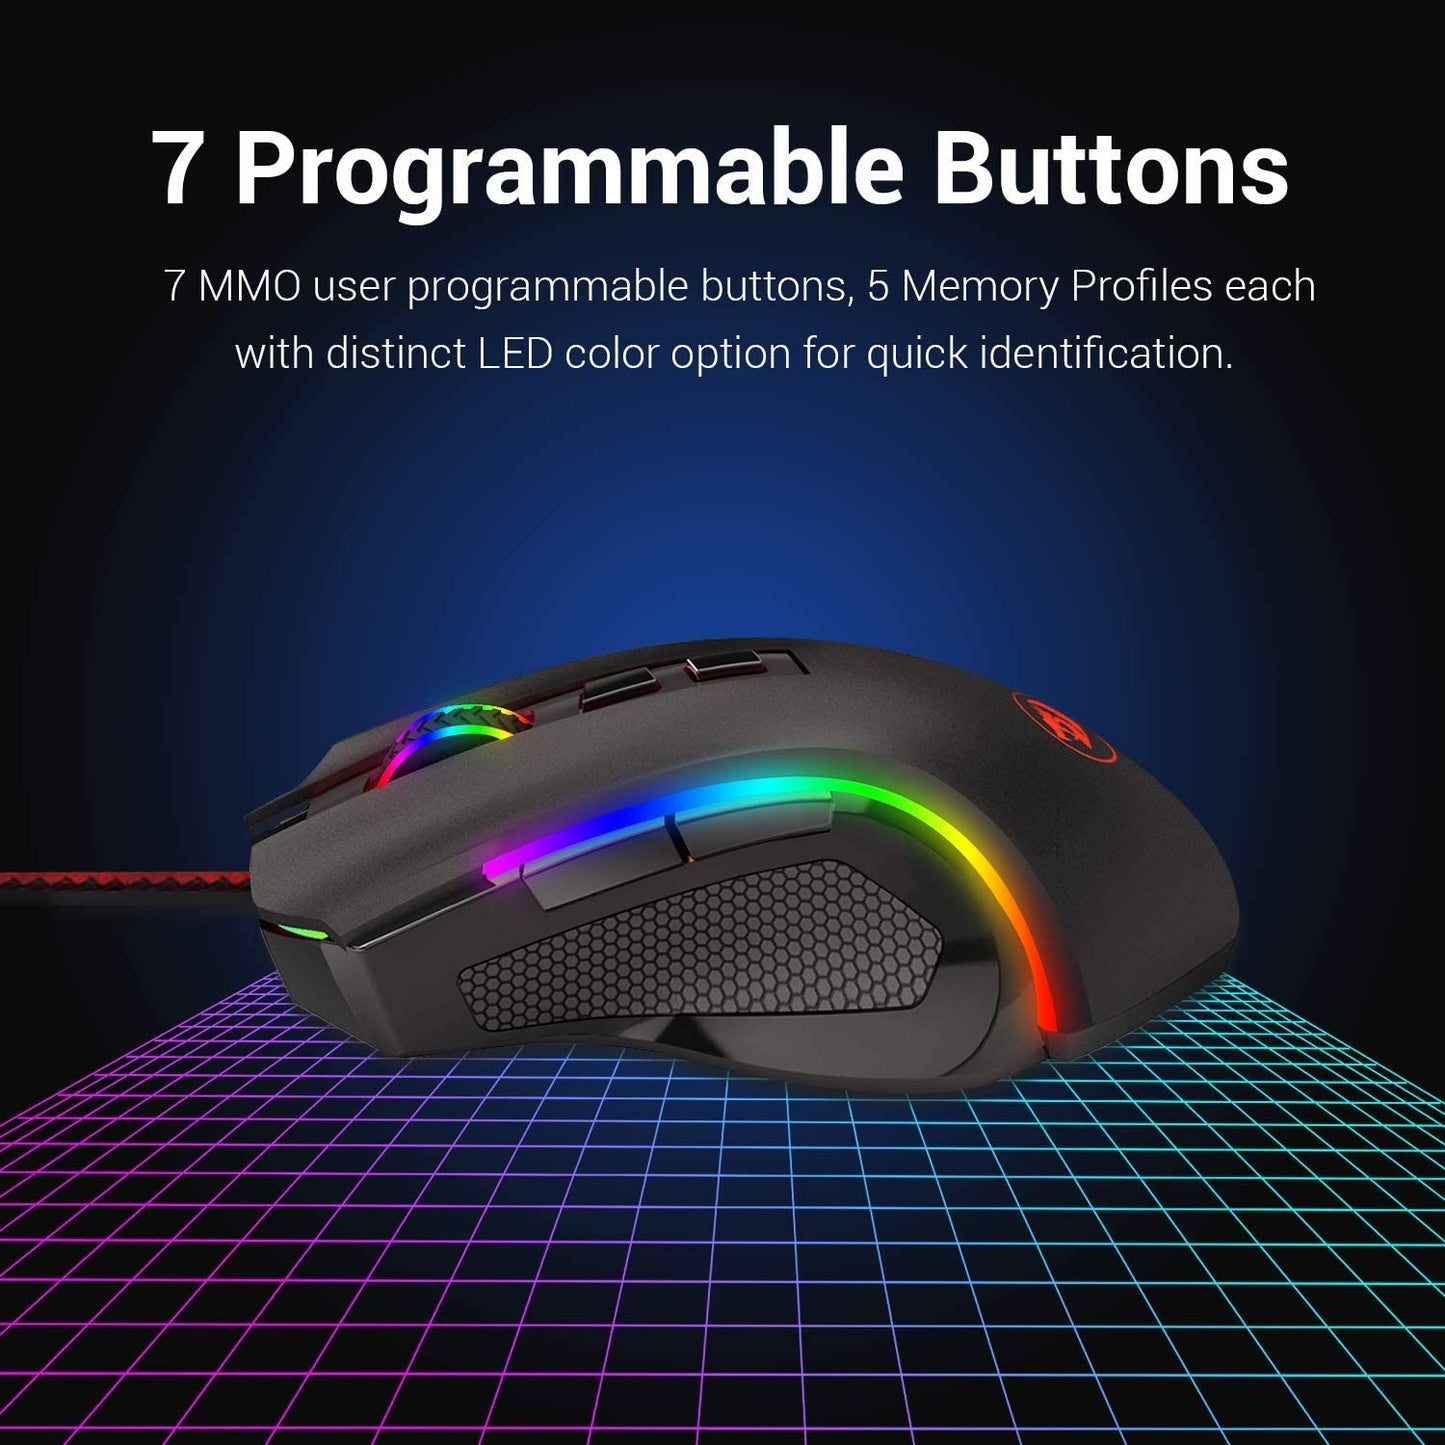 Tecisoft M602 Rgb Wired Gaming Mouse Rgb Spectrum Backlit Ergonomic Mouse Griffin Programmable With 7 Backlight Modes